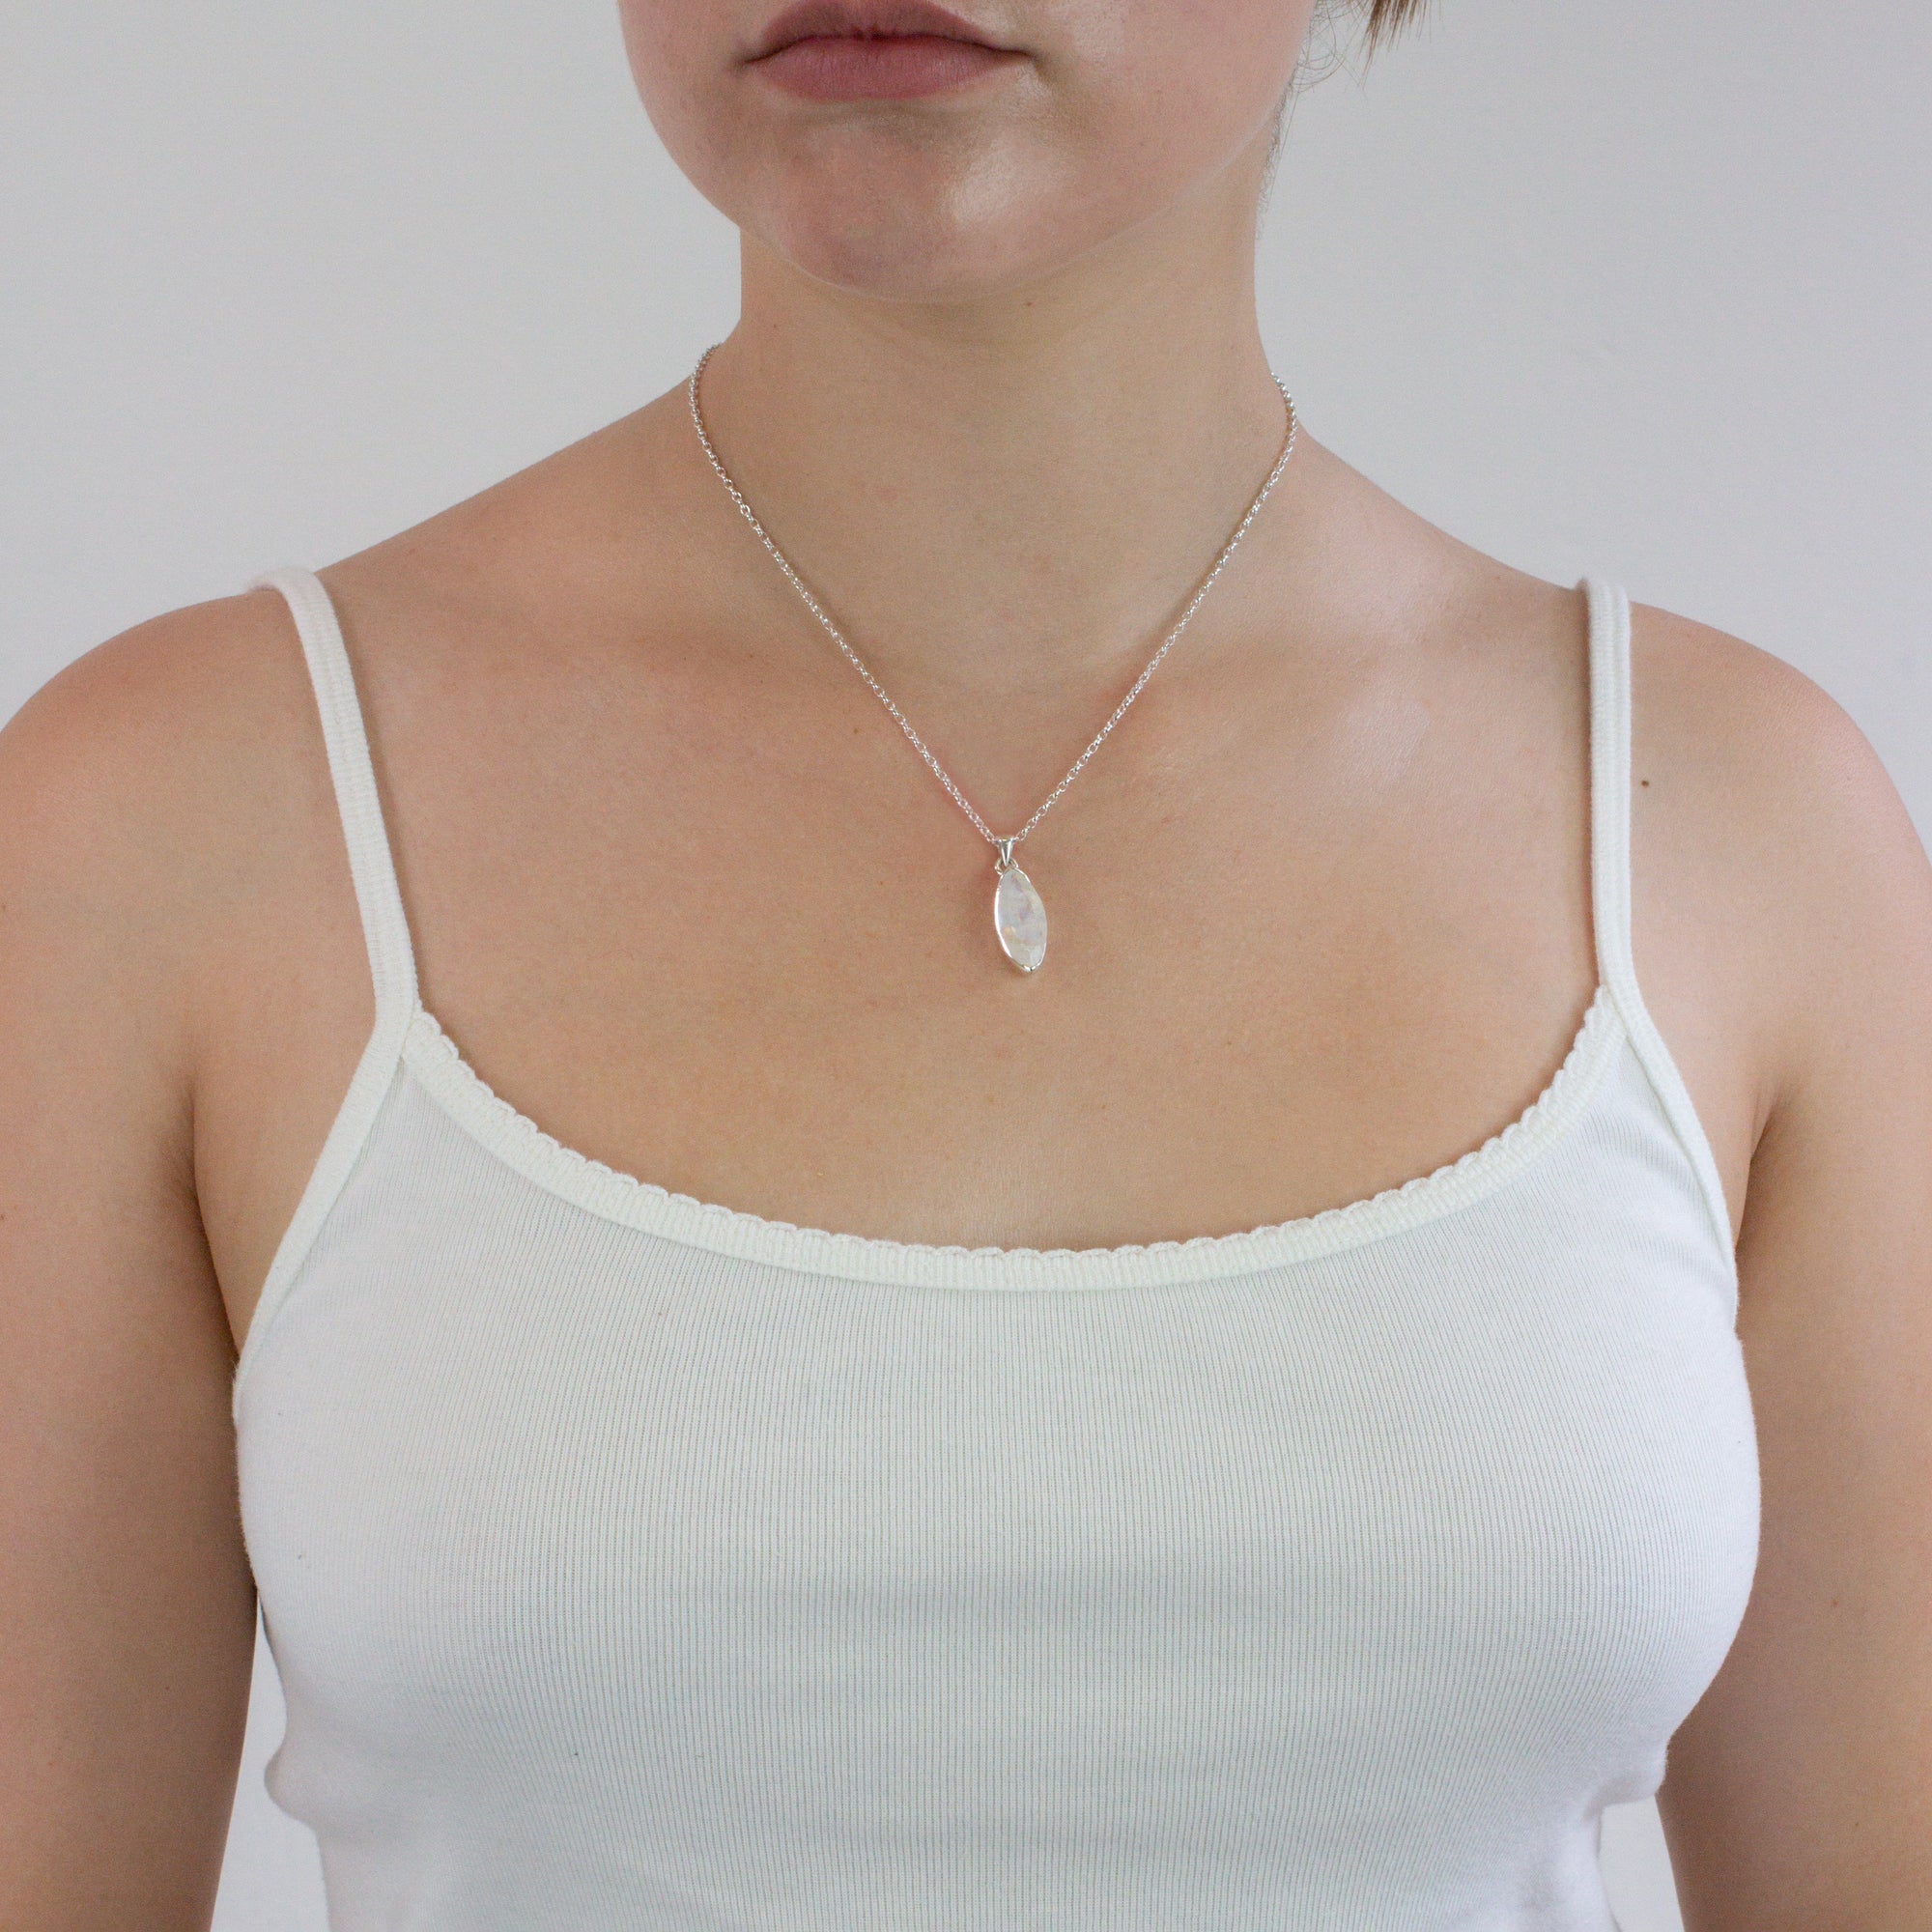 Faceted marquis Rainbow Moonstone necklace